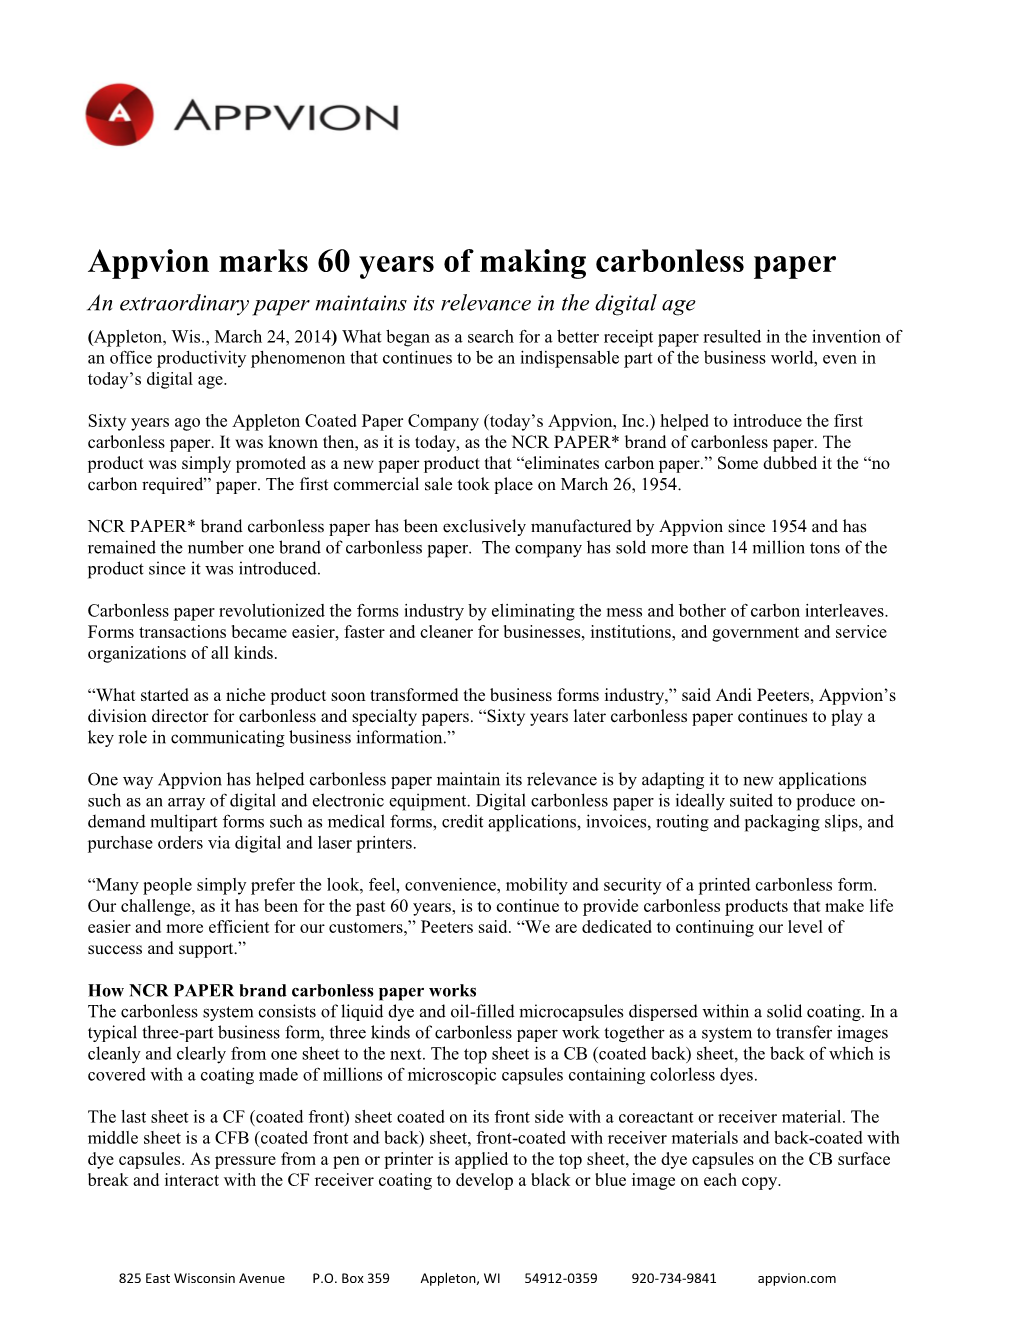 Appvion Marks 60 Years of Making Carbonless Paper